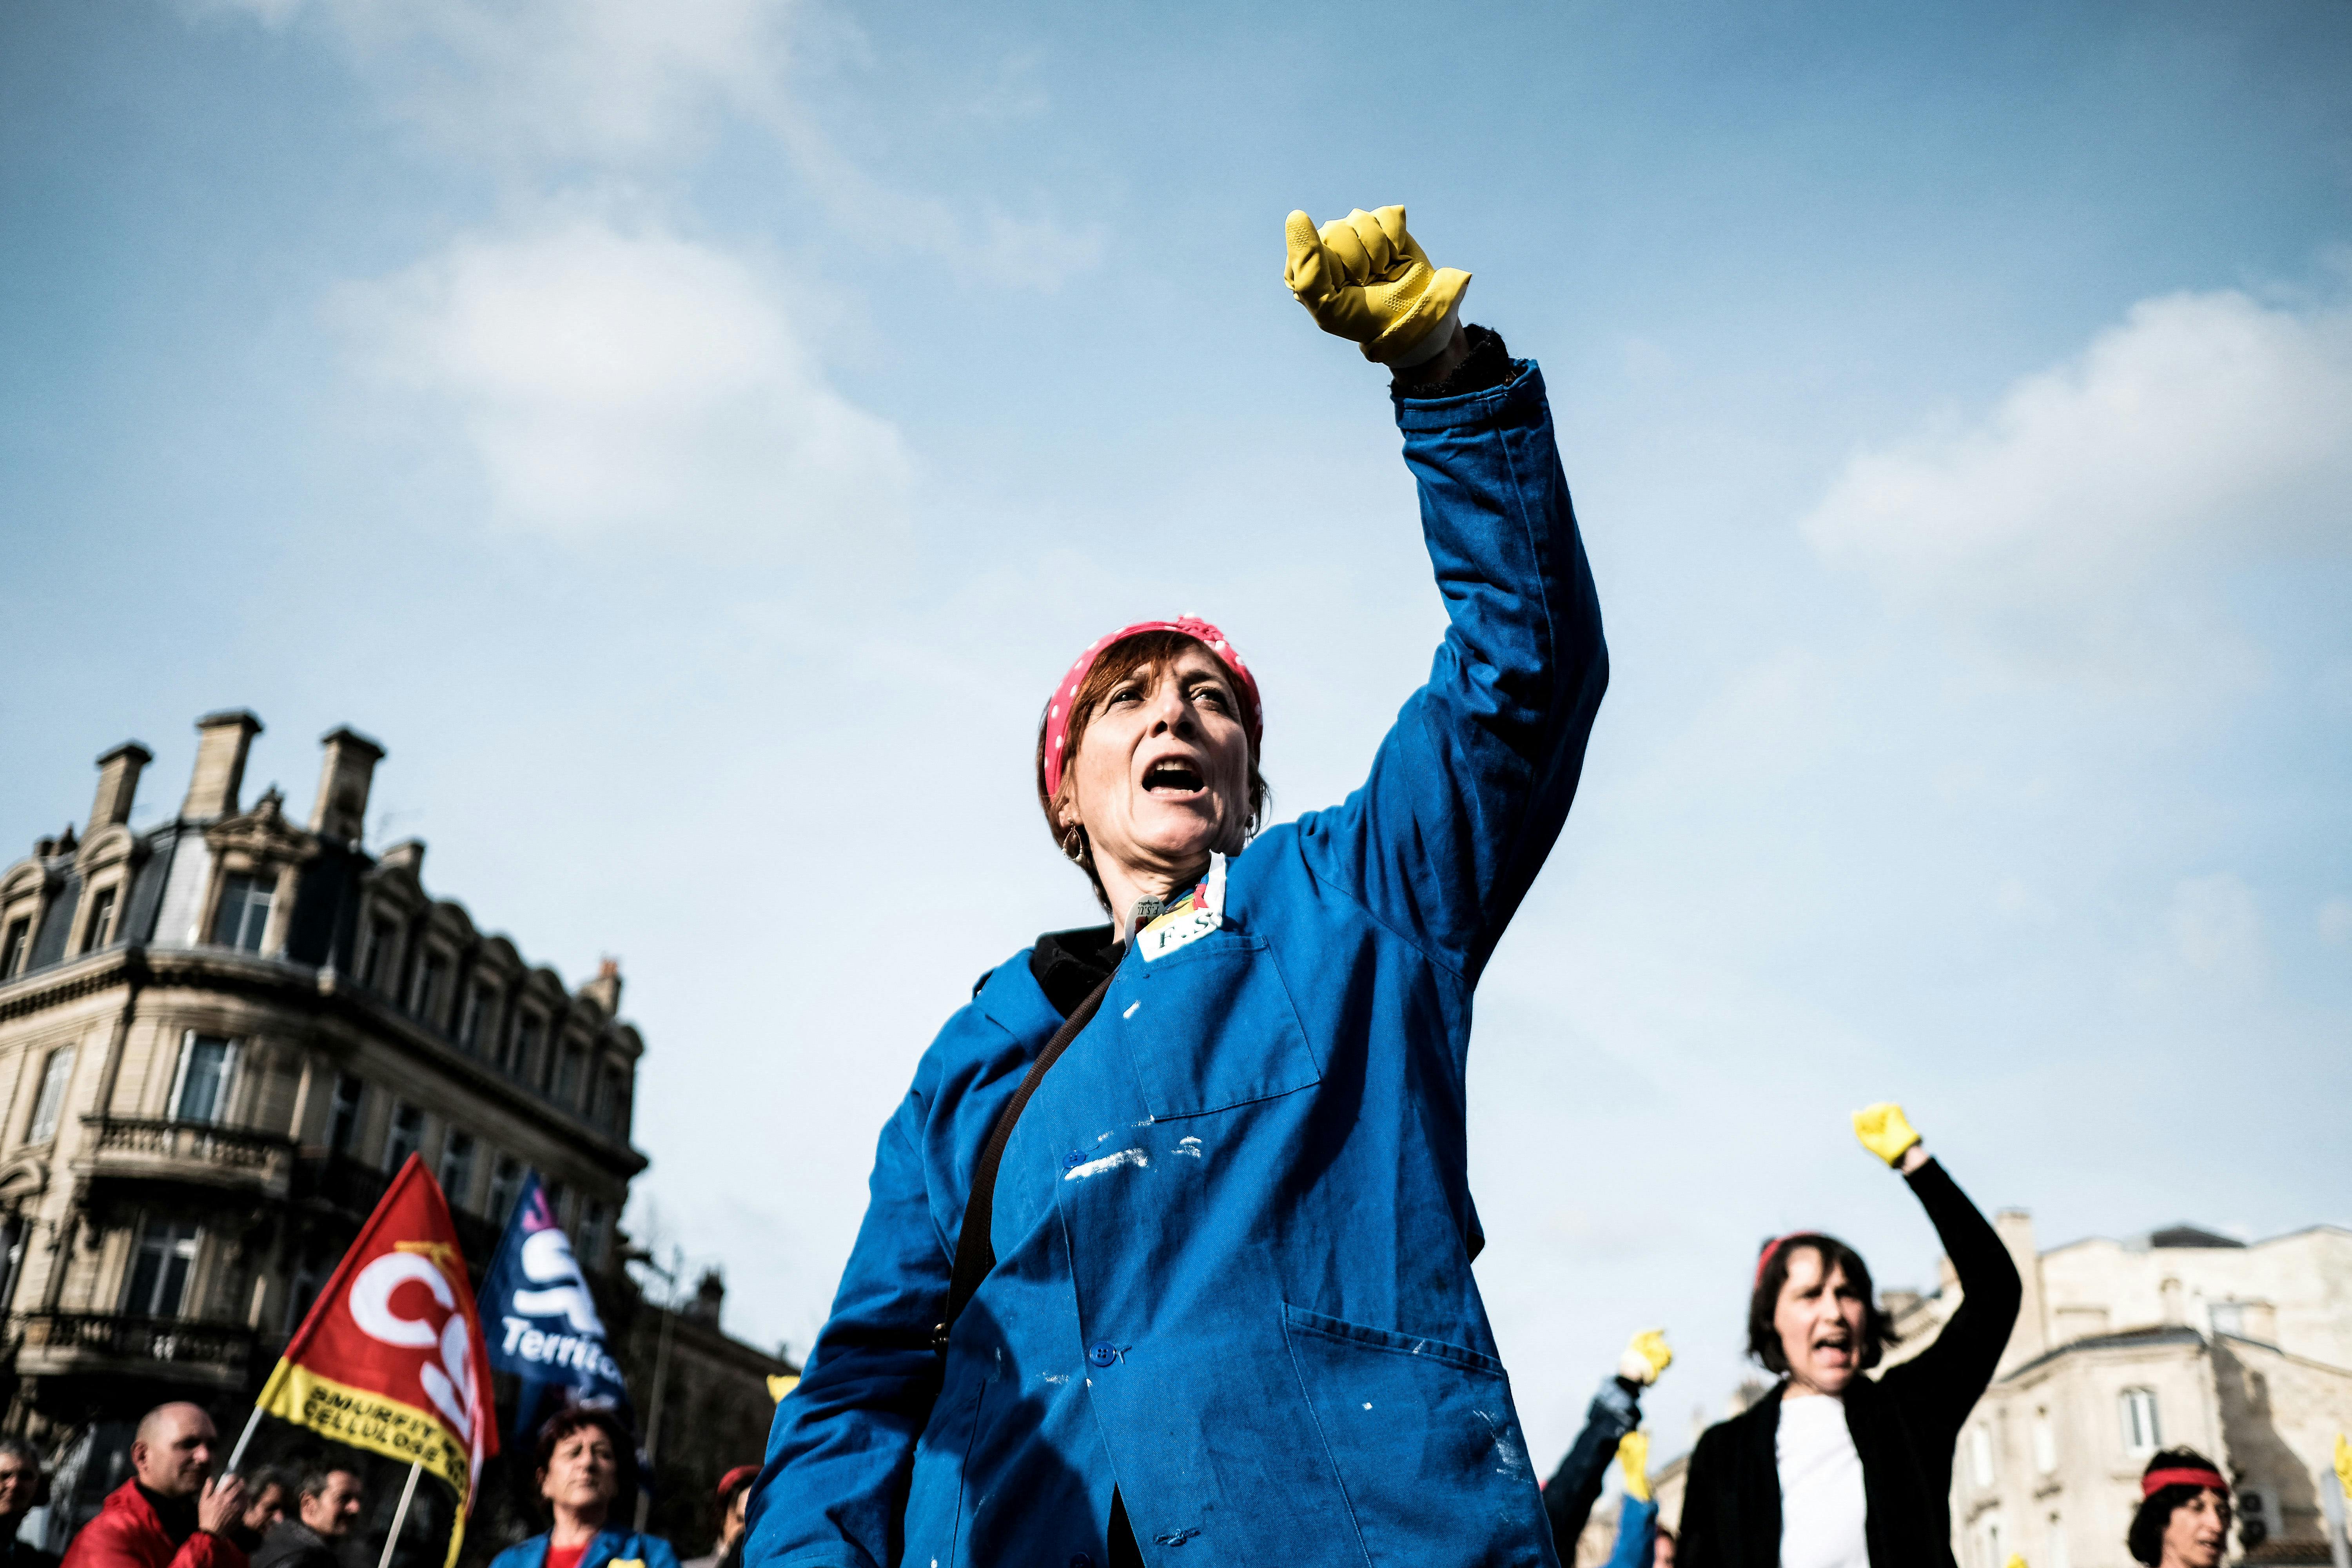 People take part in a demonstration called by several representative workers unions against French government pension reform plans that have raised many protests and multi-sector strikes since early December 2019. Bordeaux, France on January 29, 2020. Photo by Alban de Jong/ABACAPRESS.COM